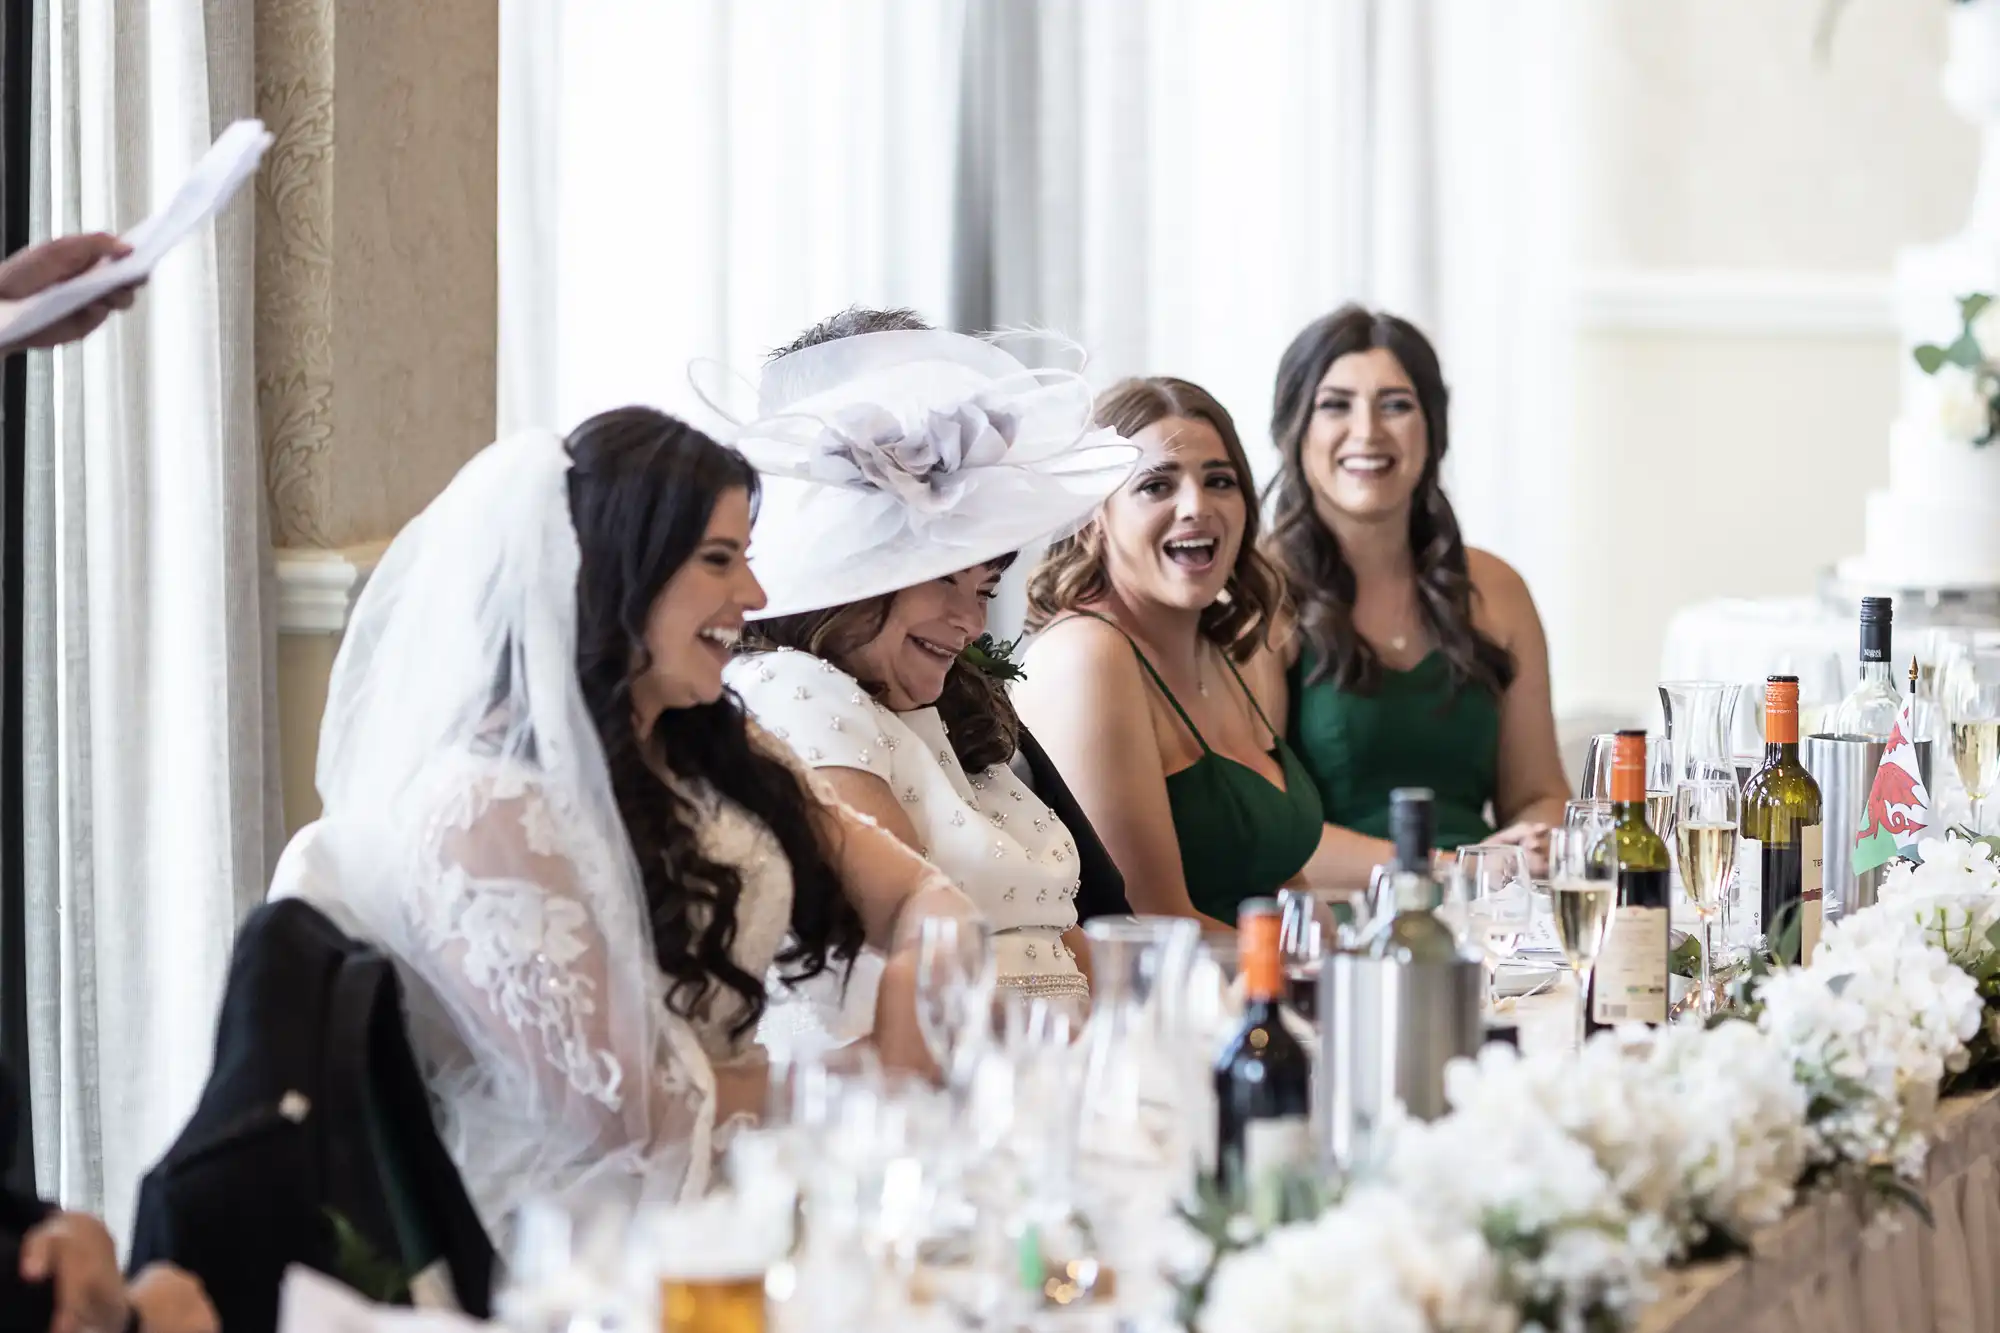 A bride in a white dress and veil laughing with three bridesmaids at a wedding reception table, surrounded by floral decorations and beverages.